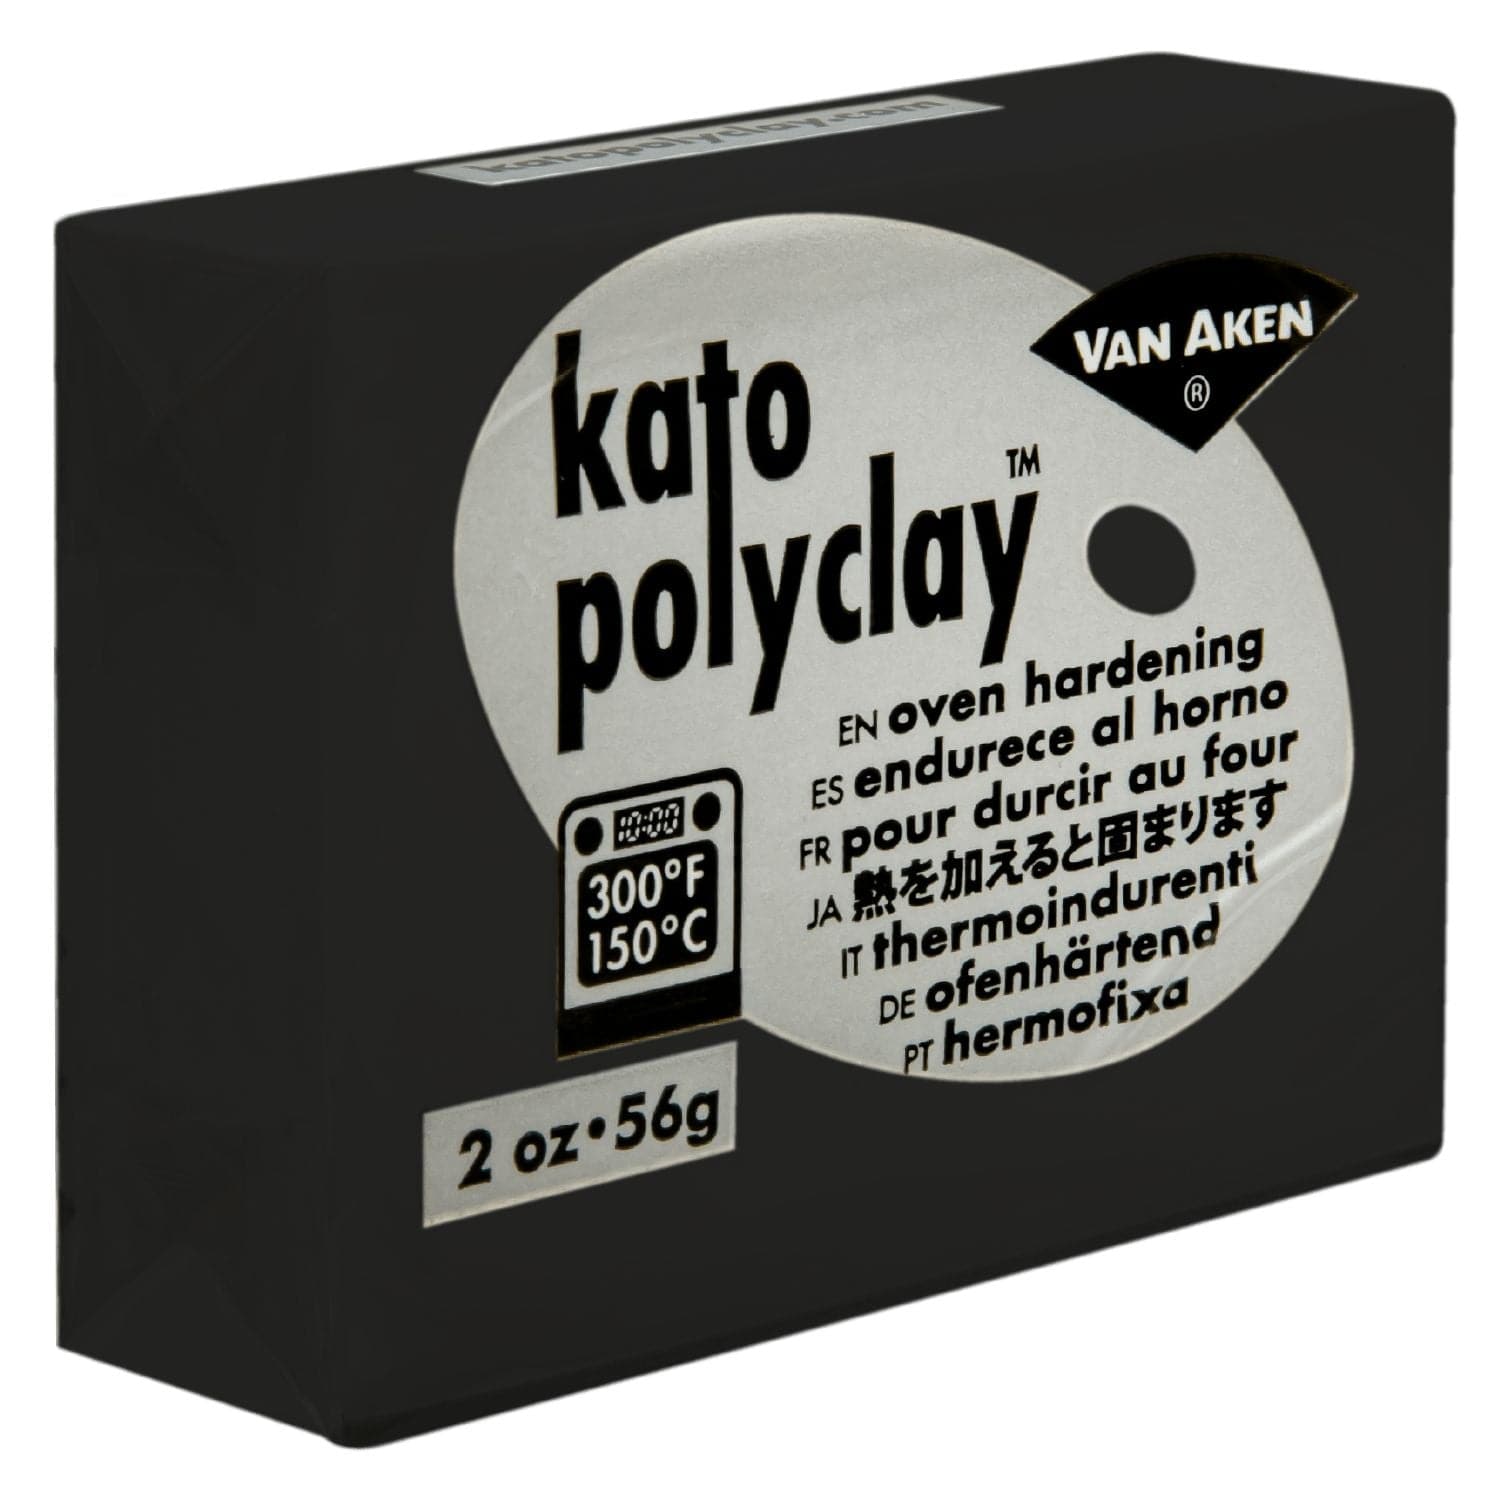 Image of Kato Oven Baked Polymer Clay Polyclay-Black 56g